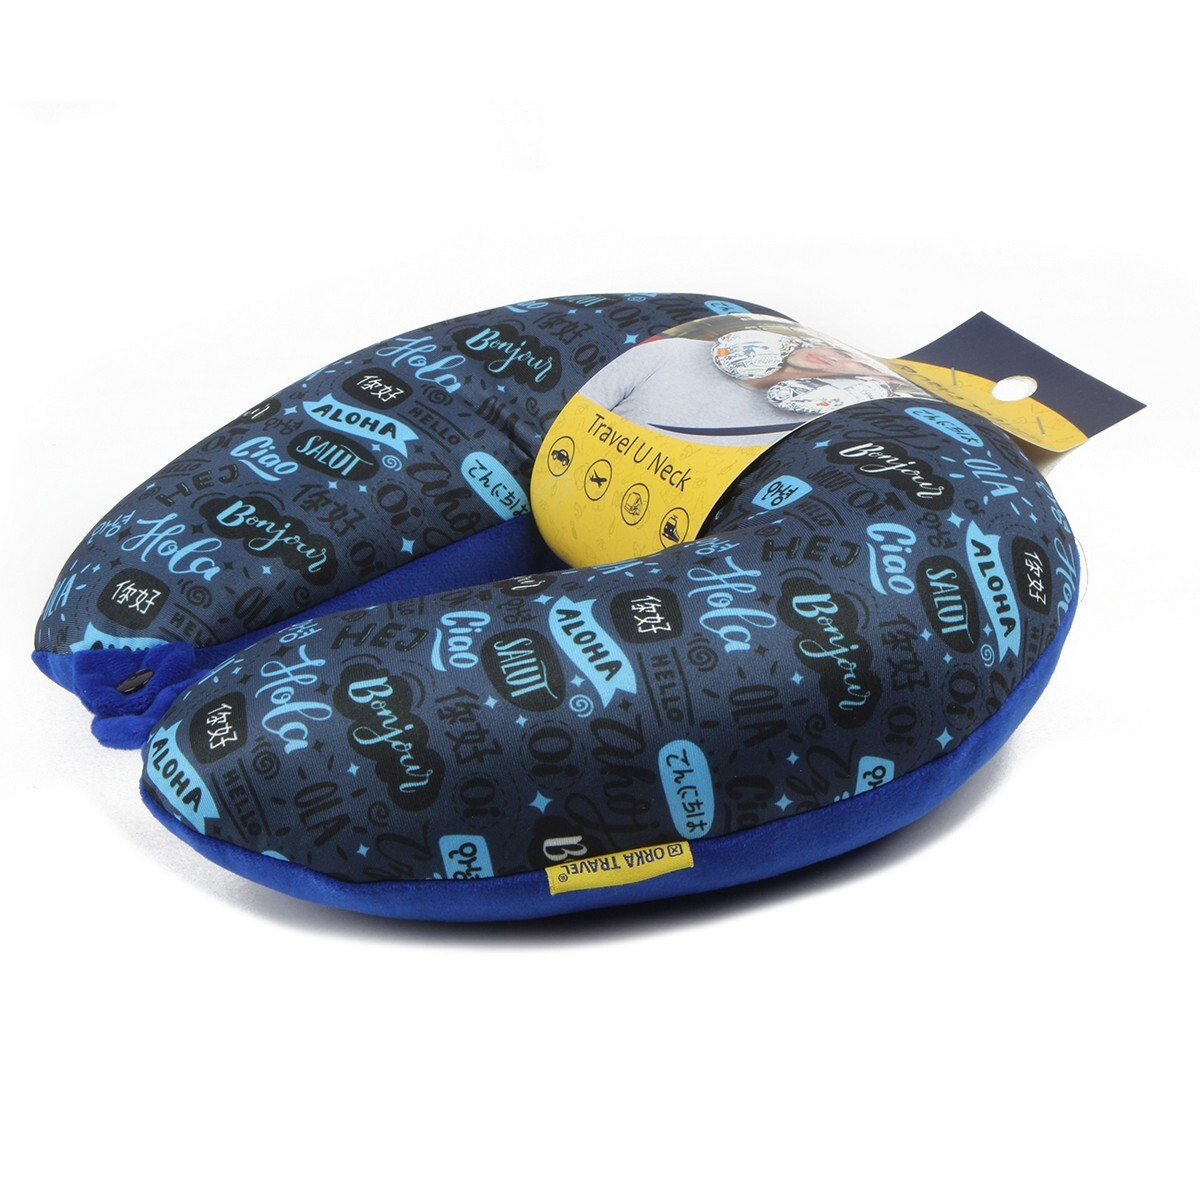 Orka Travel Neck Pillow Printed